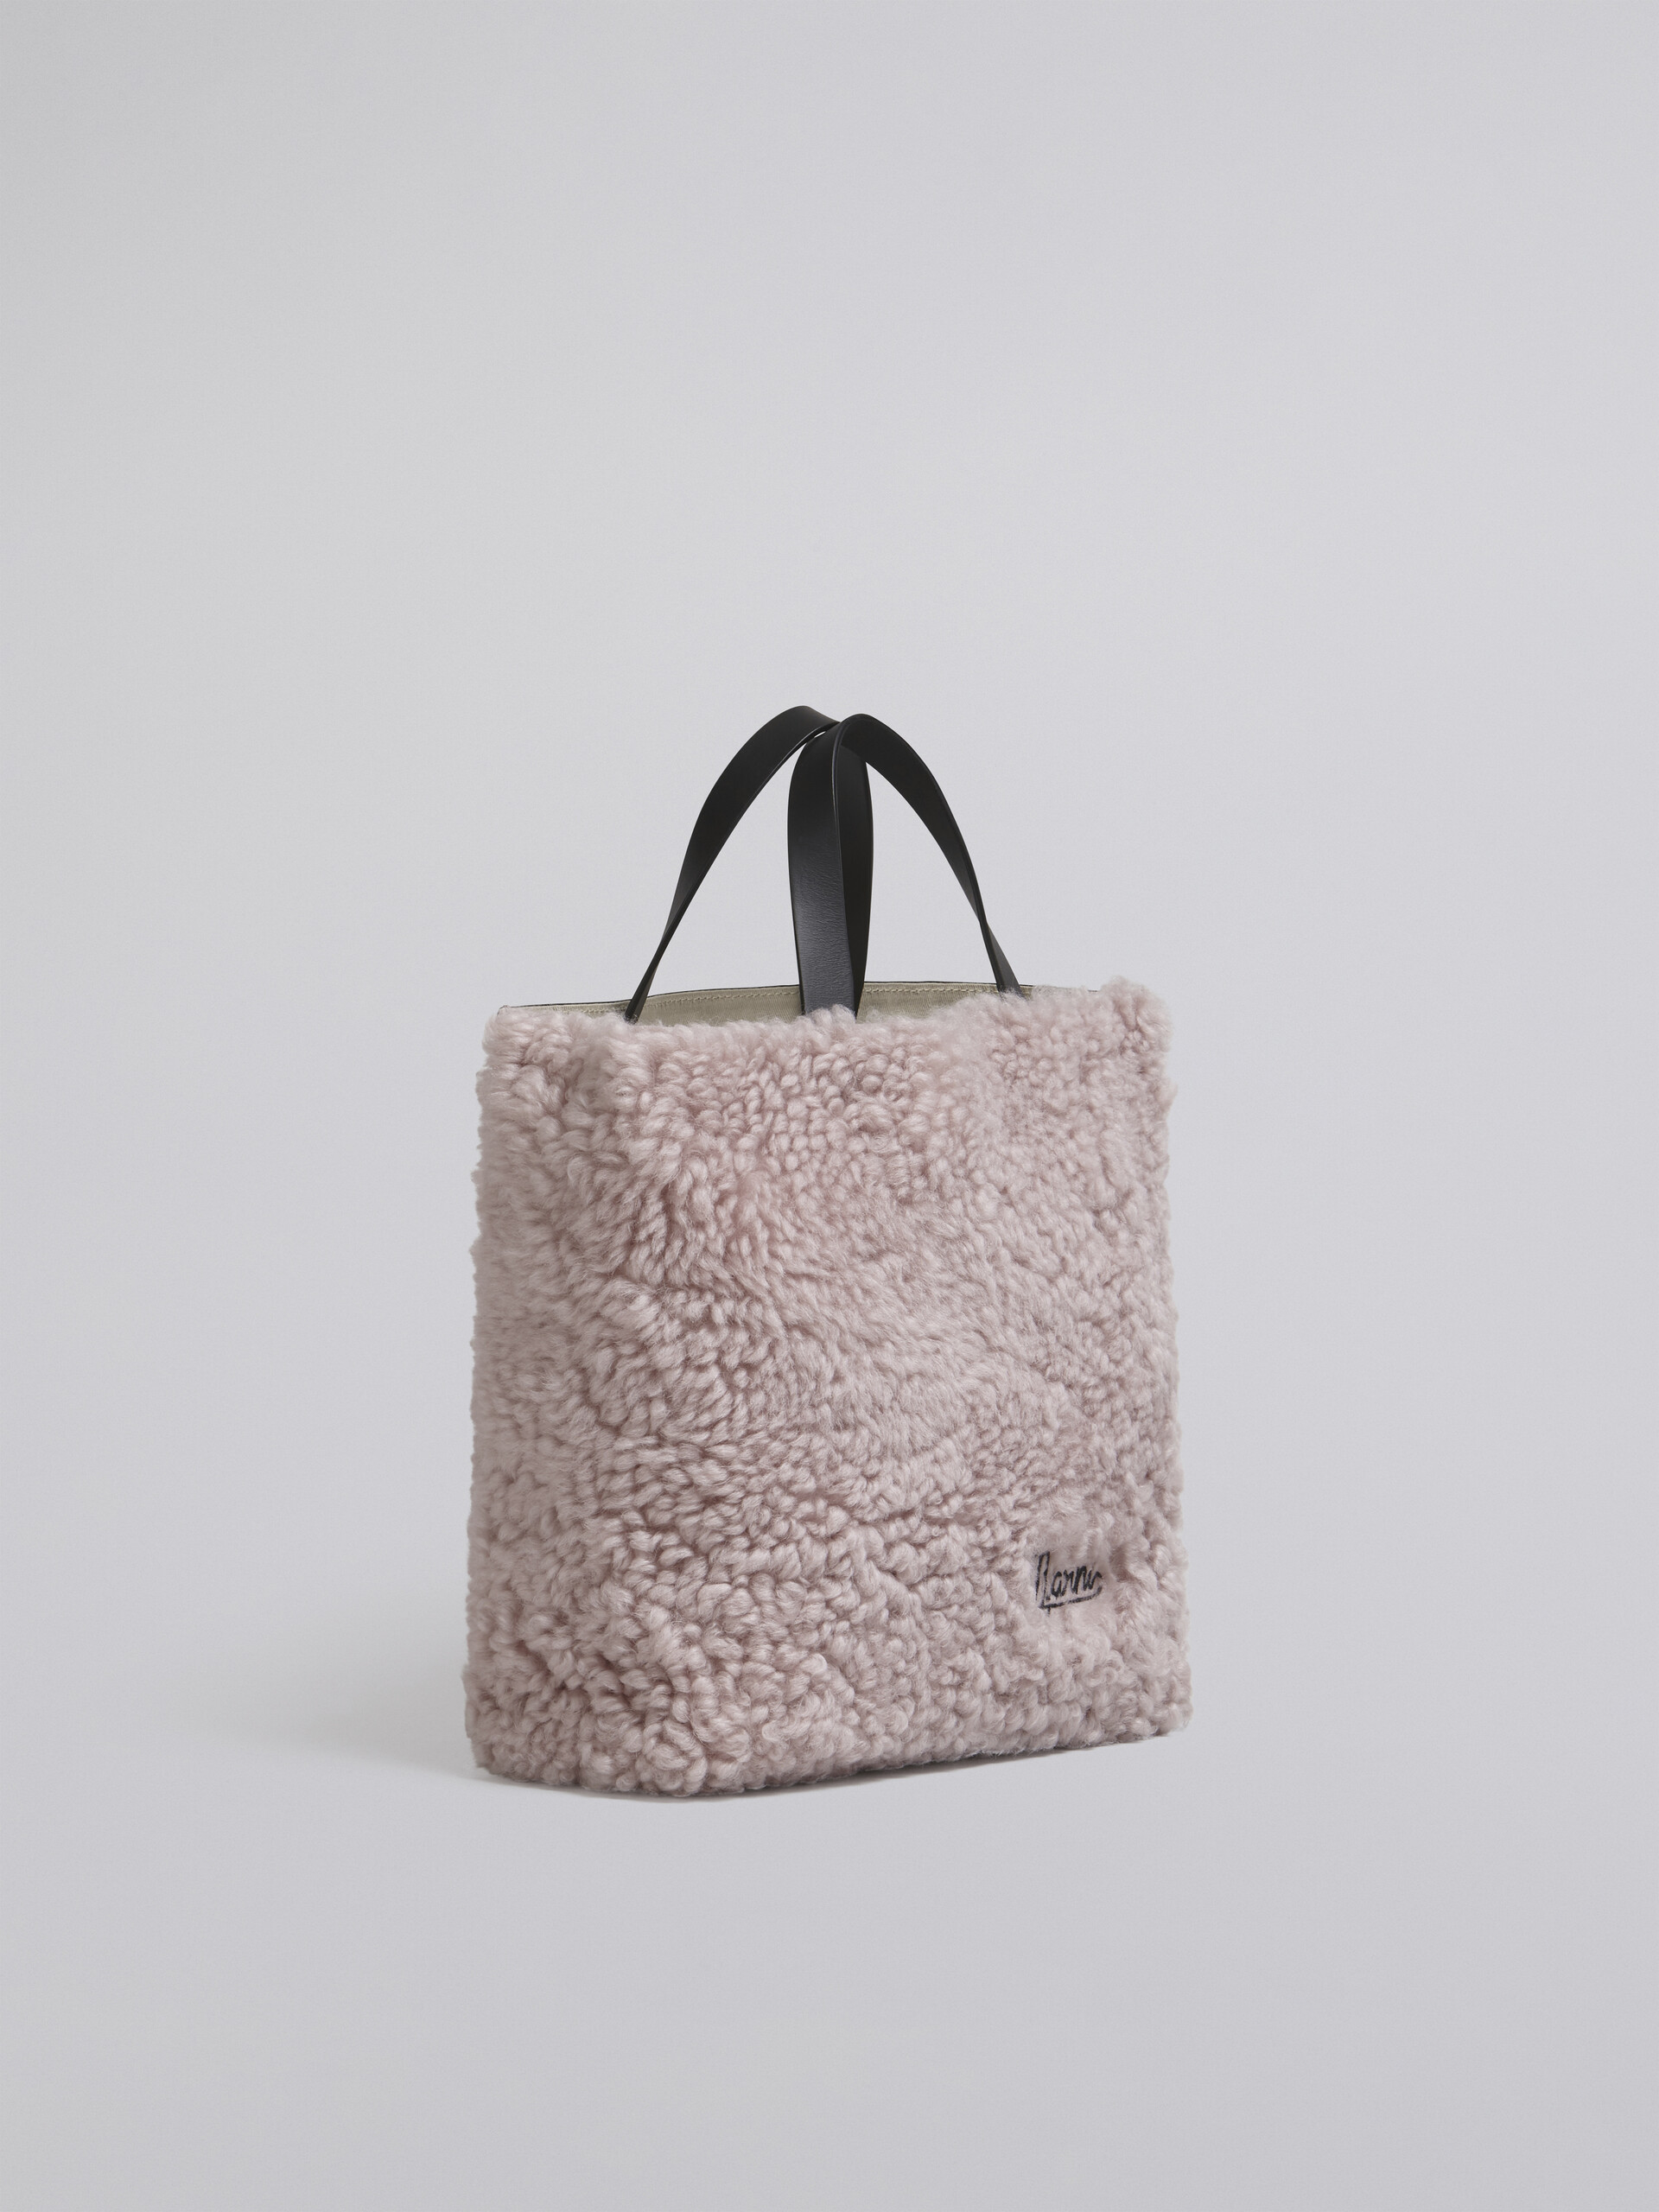 MUSEO SOFT small bag in pnk shearling - Shopping Bags - Image 5